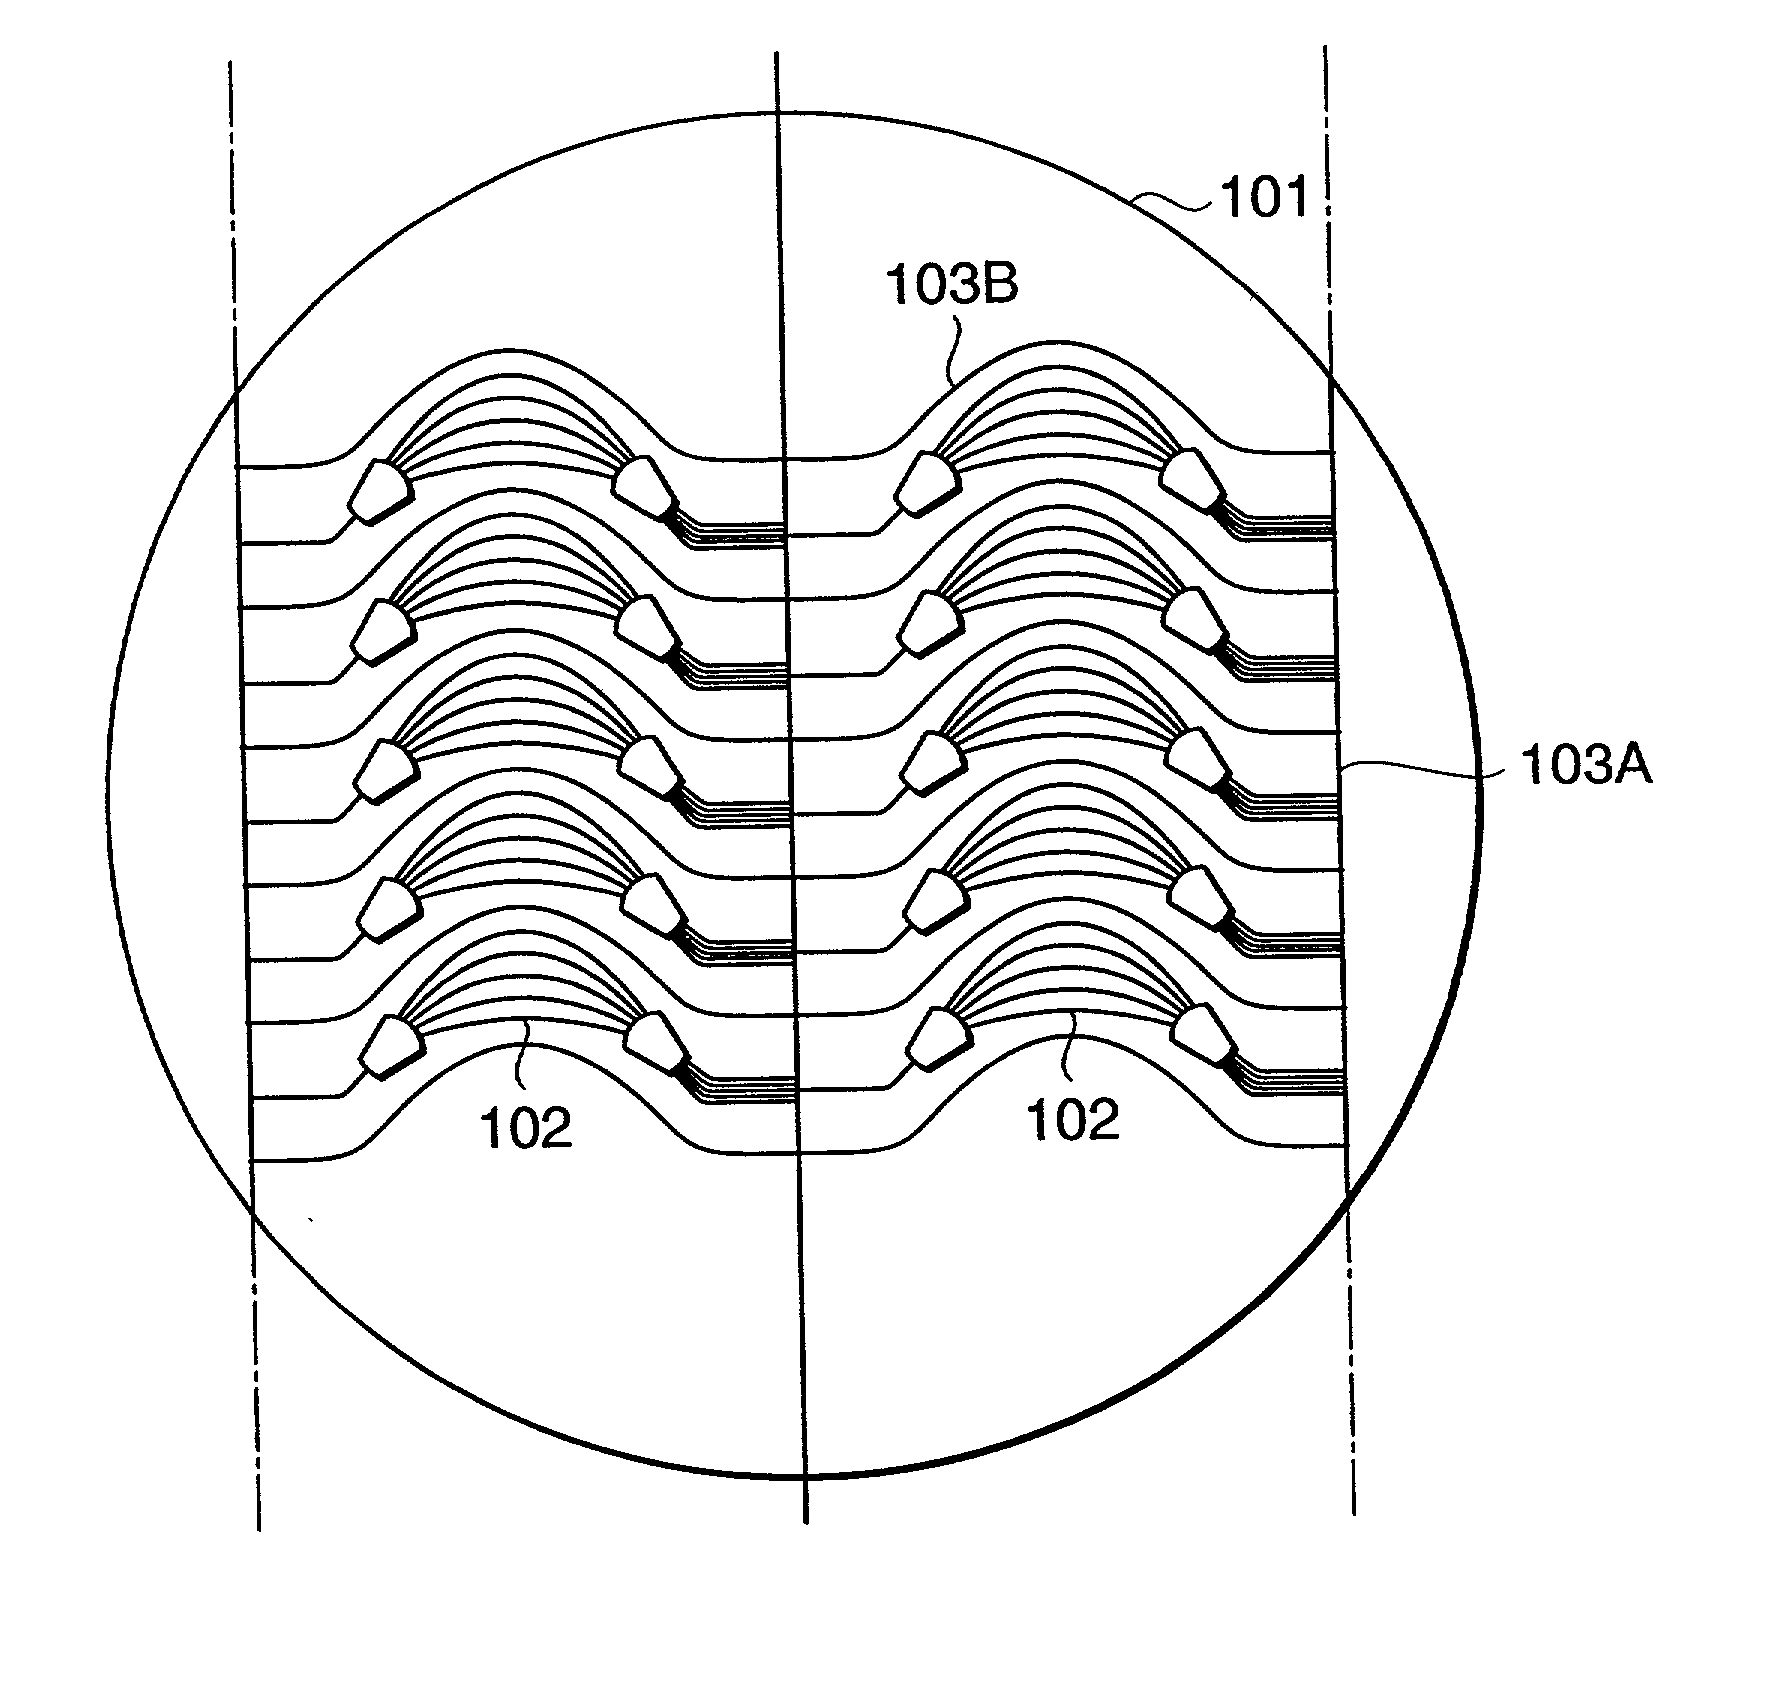 Semiconductor chip having an arrayed waveguide grating and method of manufacturing the semiconductor chip and module containing the semiconductor chip